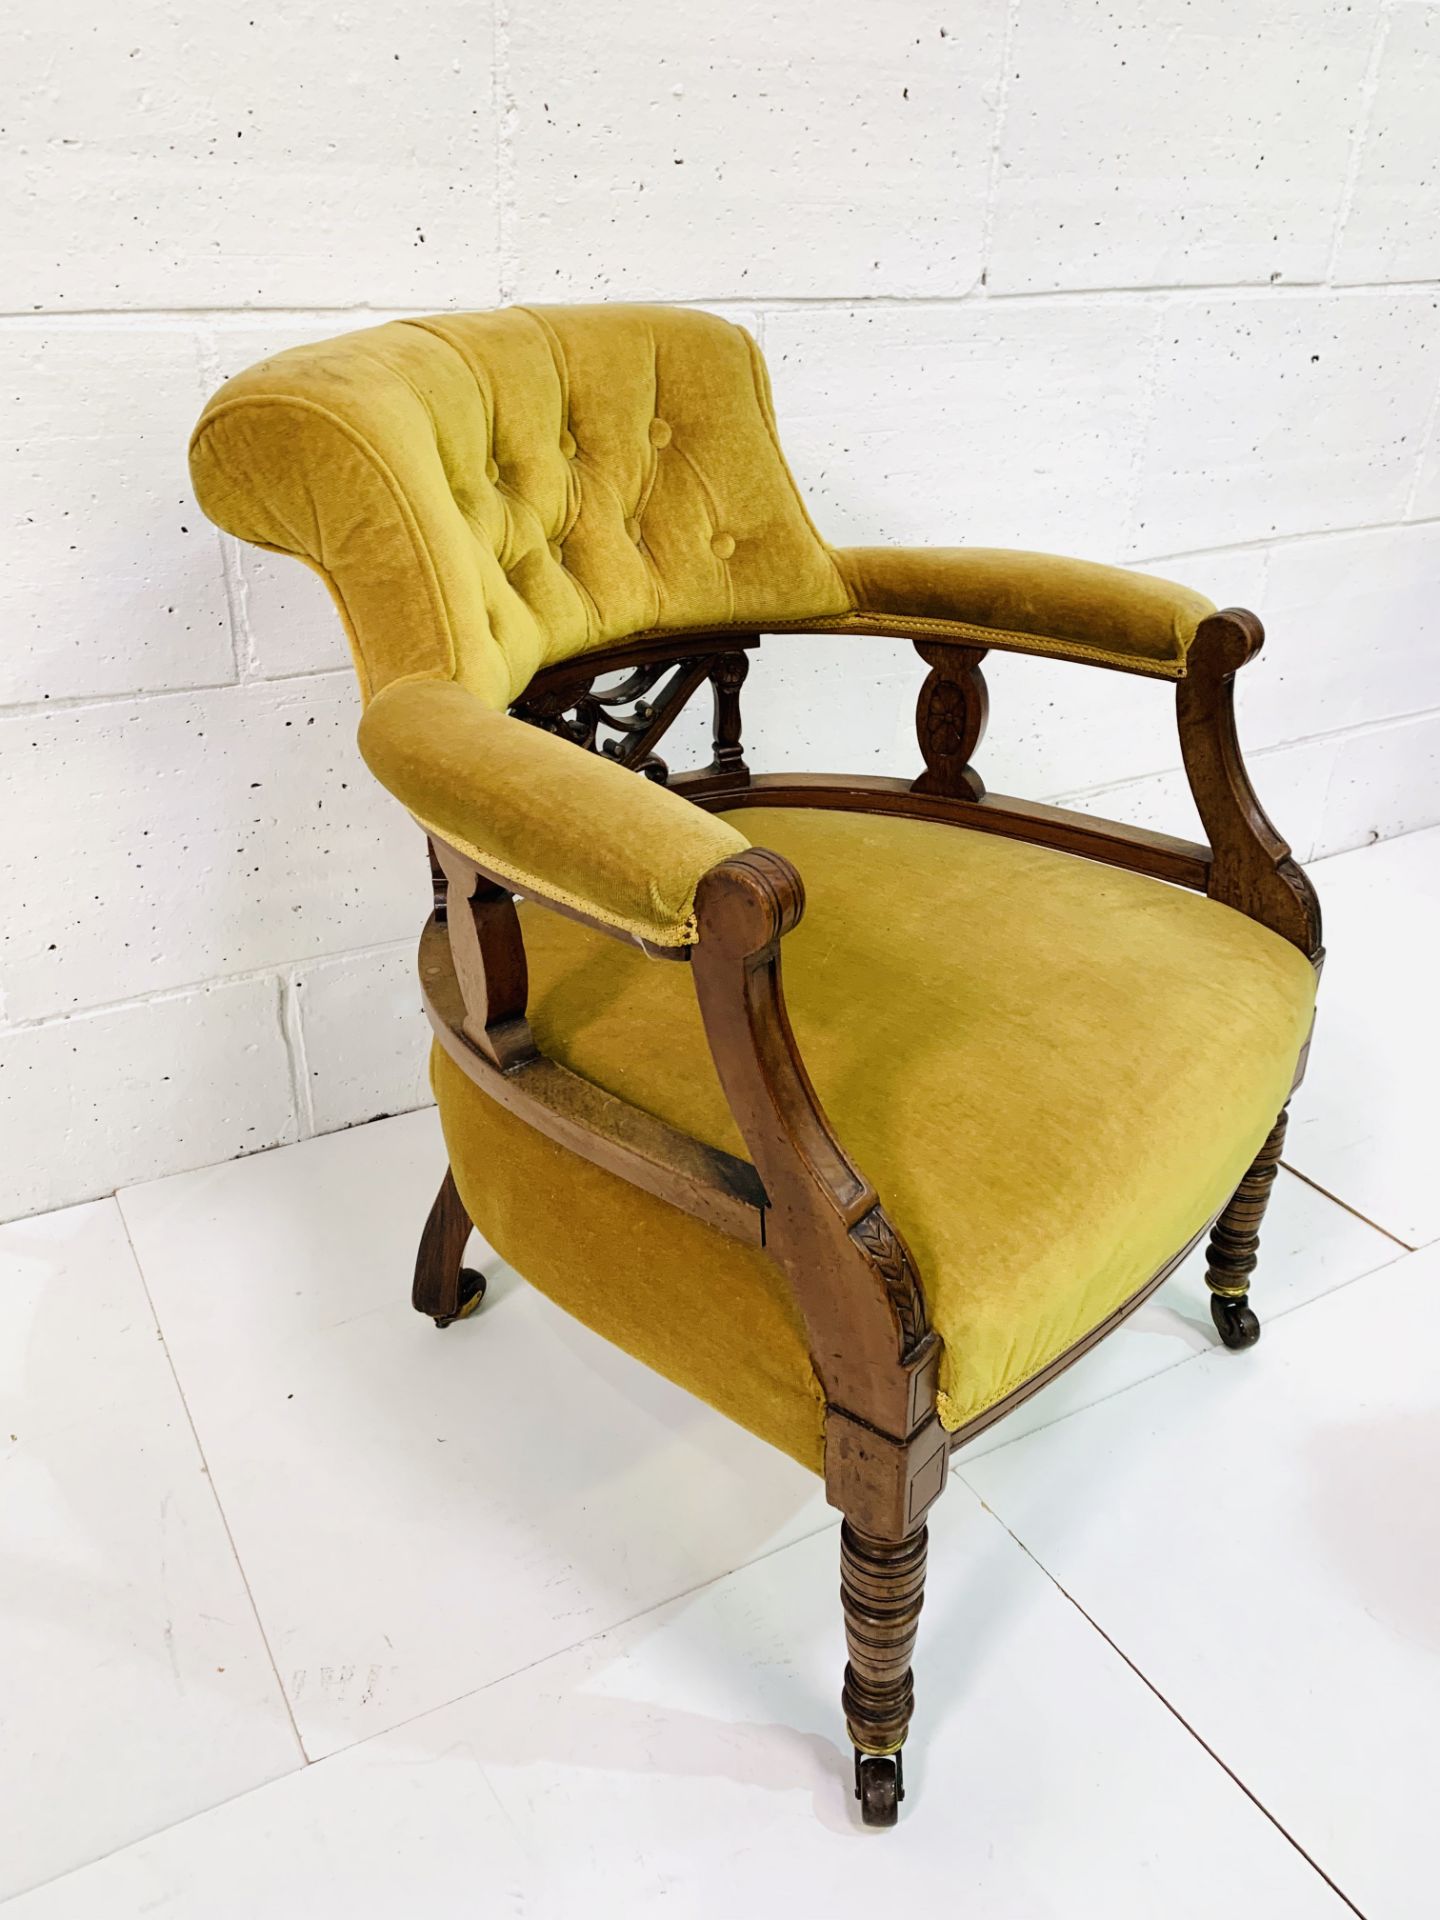 Mahogany yellow buttoned velvet upholstered open arm chair with decorative splat. - Image 4 of 6